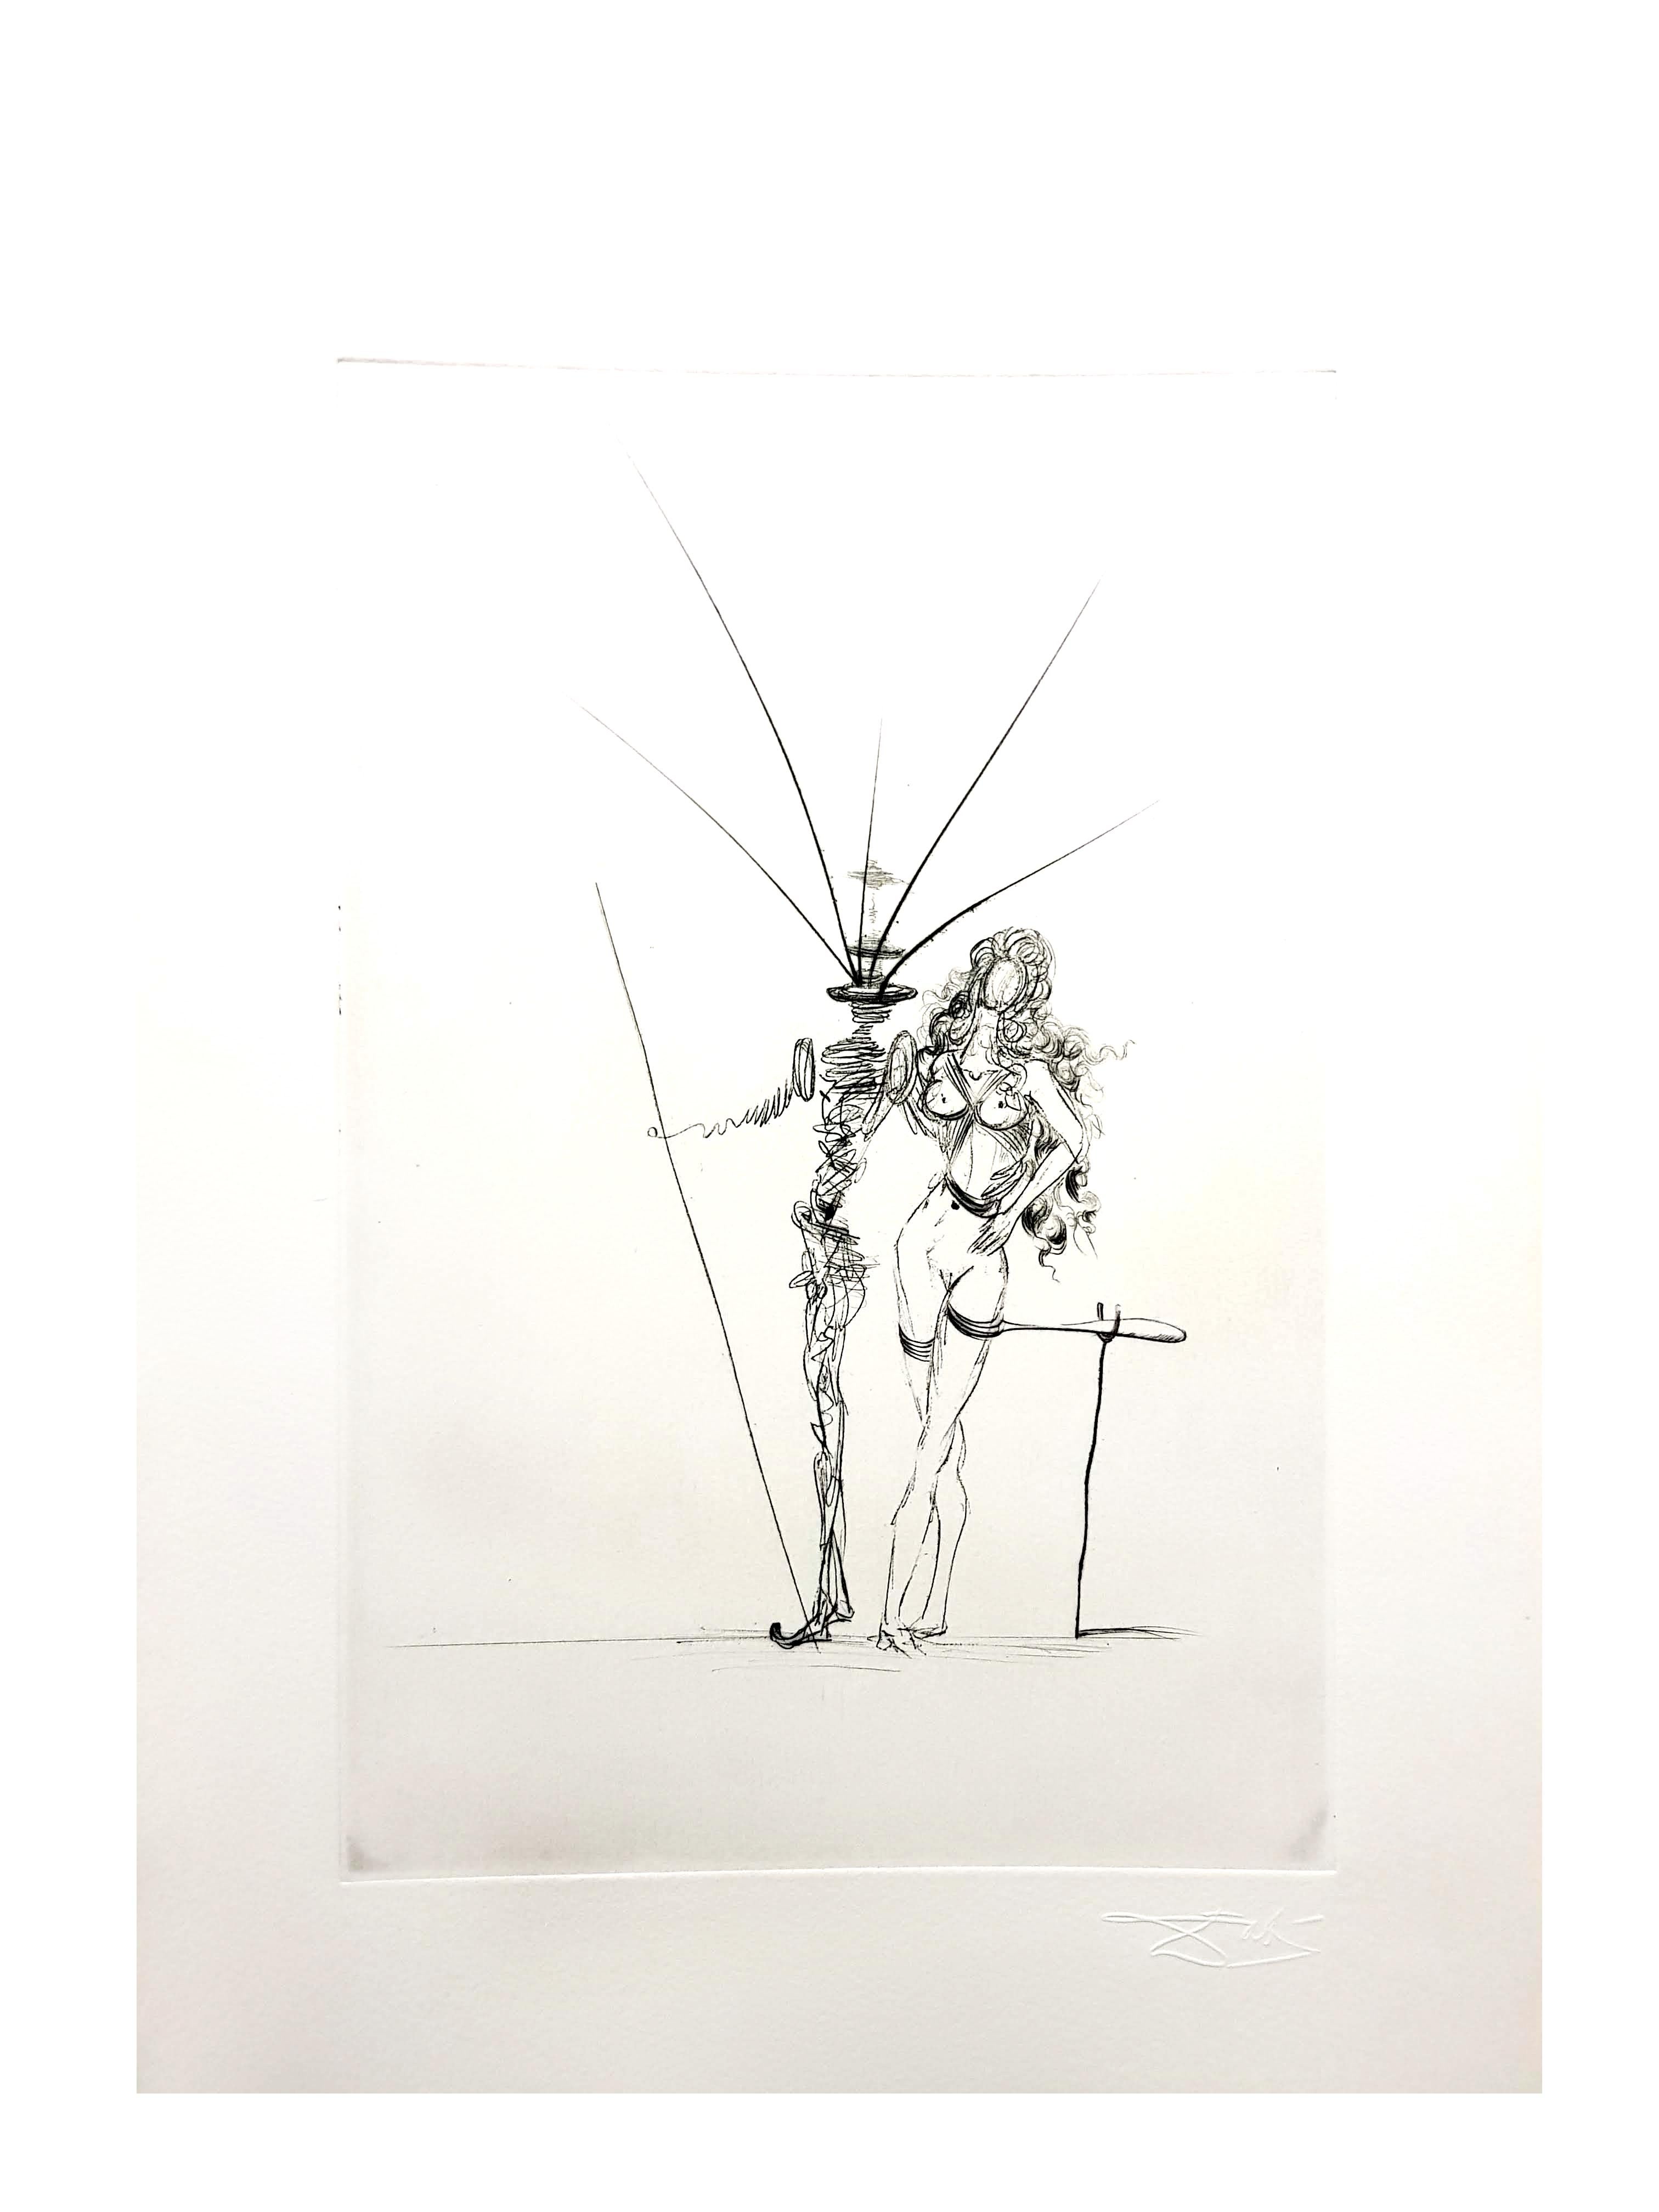 Salvador Dali - Couple - Original Etching
Dimensions: 38 x 28 cm
Edition: 235
1967
embossed signature
On Arches Vellum
References : Field 67-10 (p. 34-35)

Salvador Dali

Salvador Dali was born as the son of a prestigious notary in the small town of